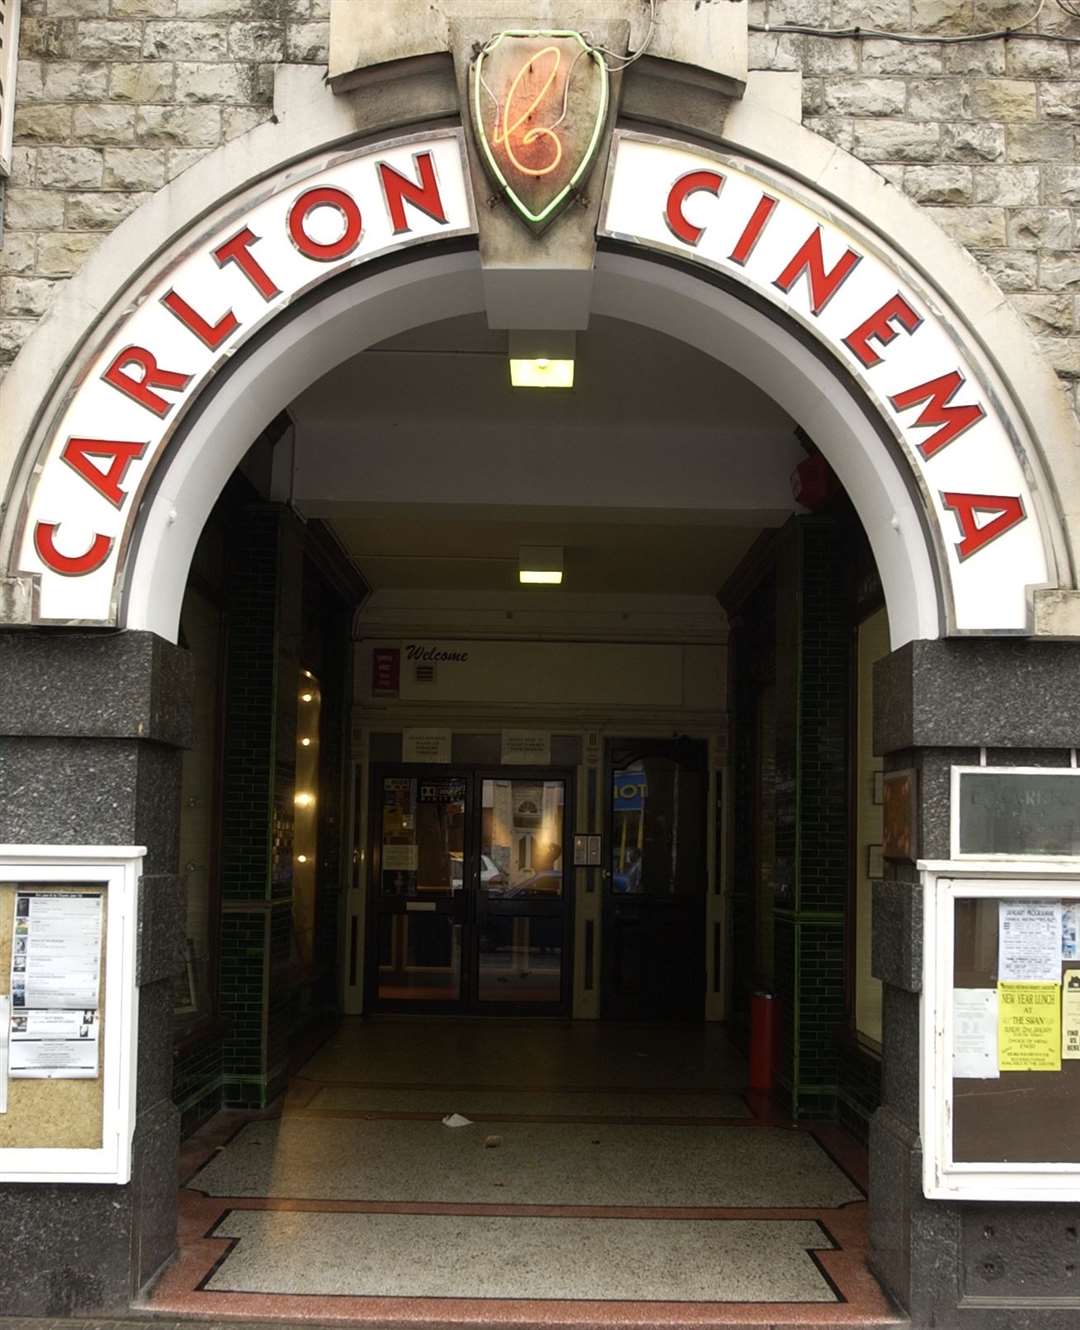 The Carlton Cinema in Westgate was taken to court by Thanet District Council